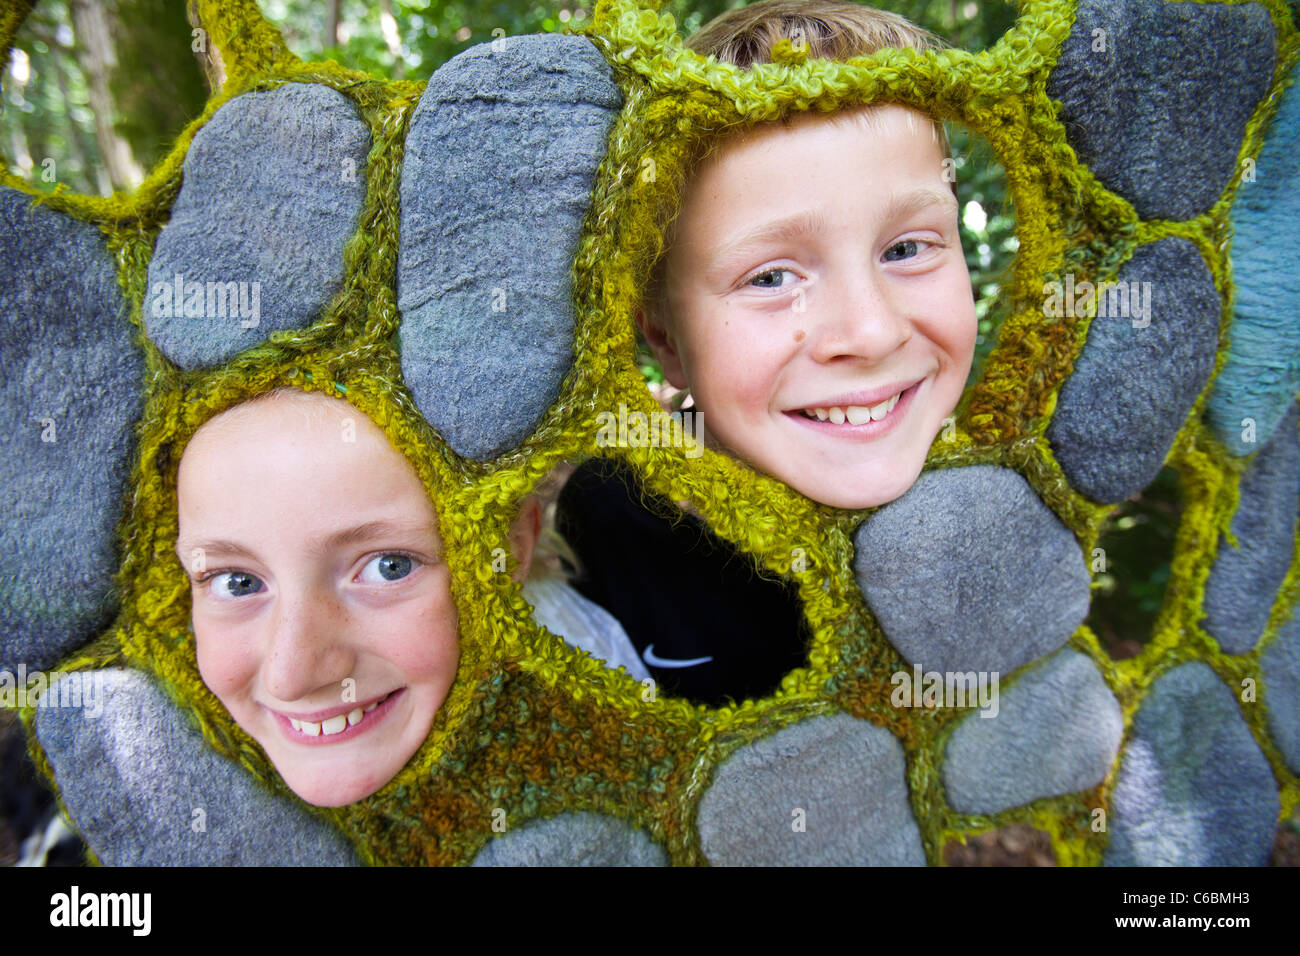 A young girl and boy poke thier faces into a hole in a textile design by Dianne Standen displayed in the grounds of Rydal Hall Stock Photo